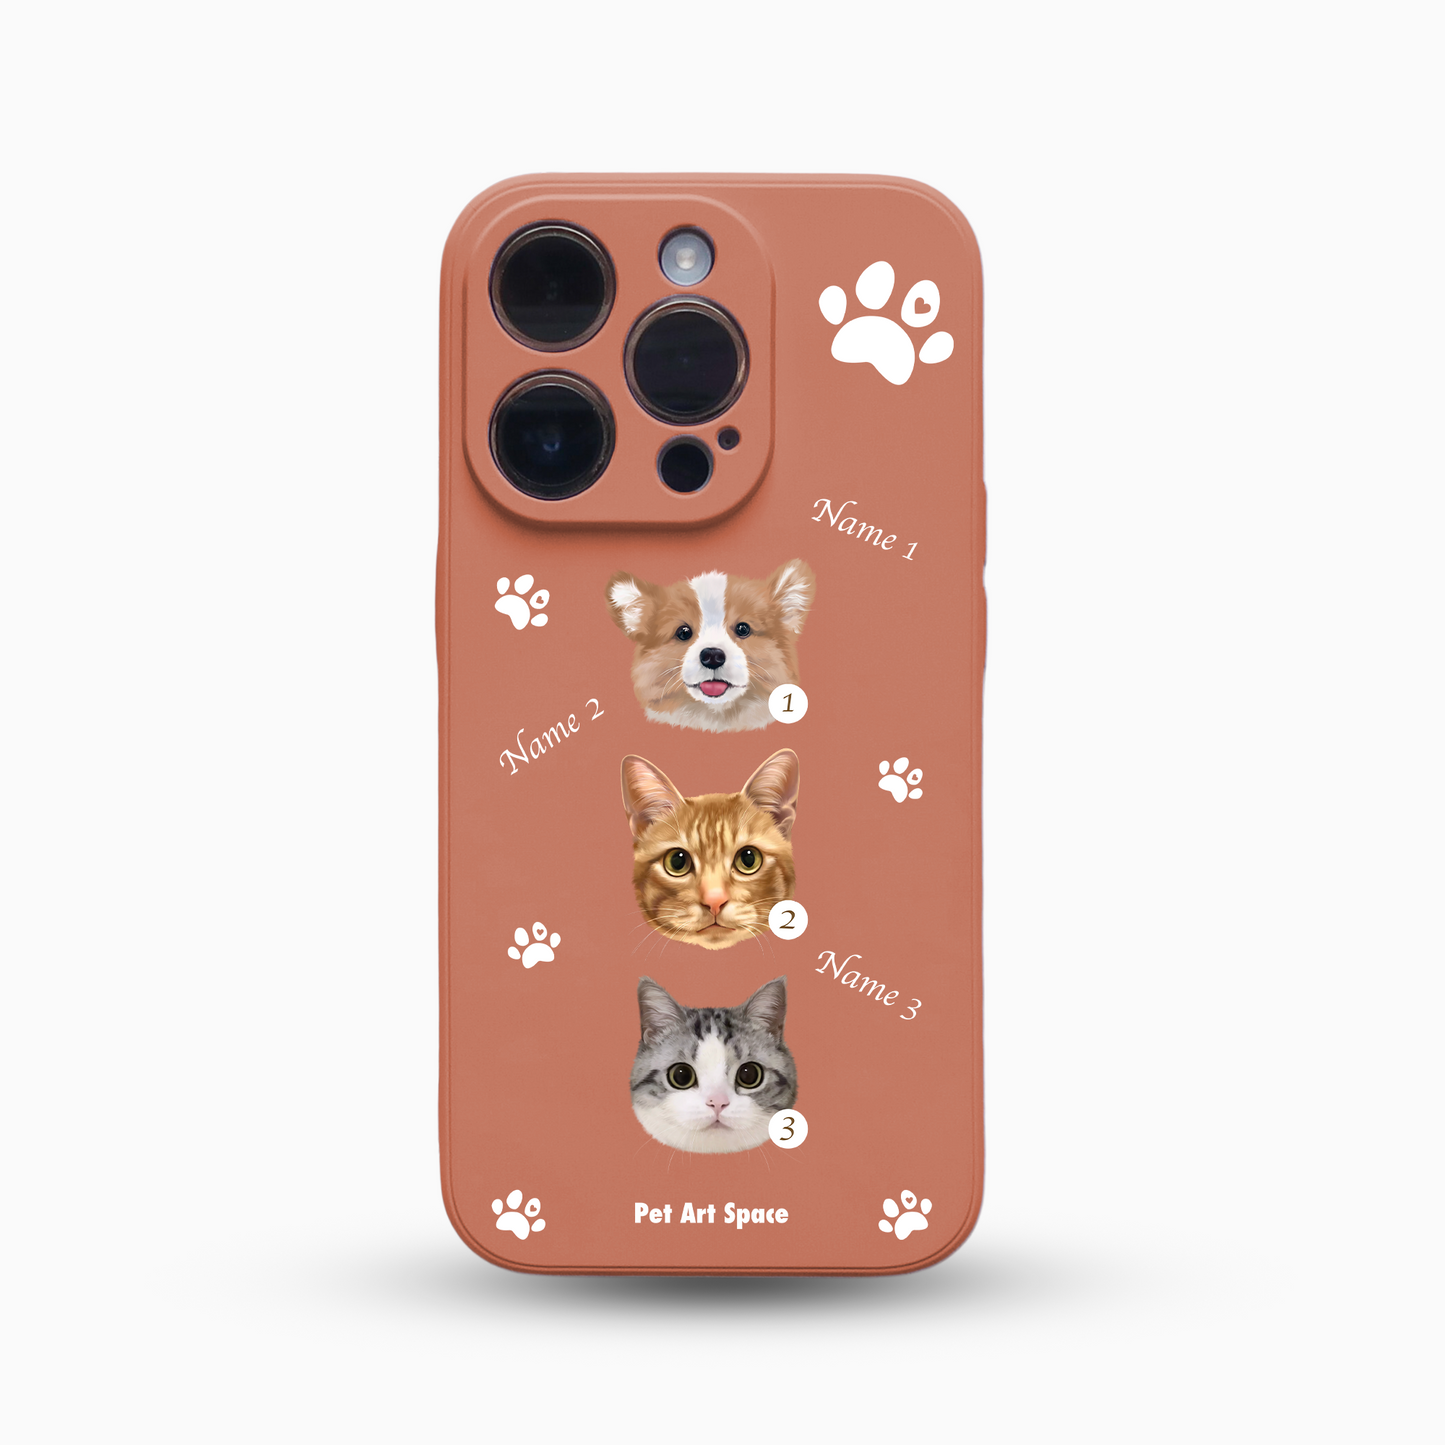 Paws for 3 Pets - Silicone Case - Orange